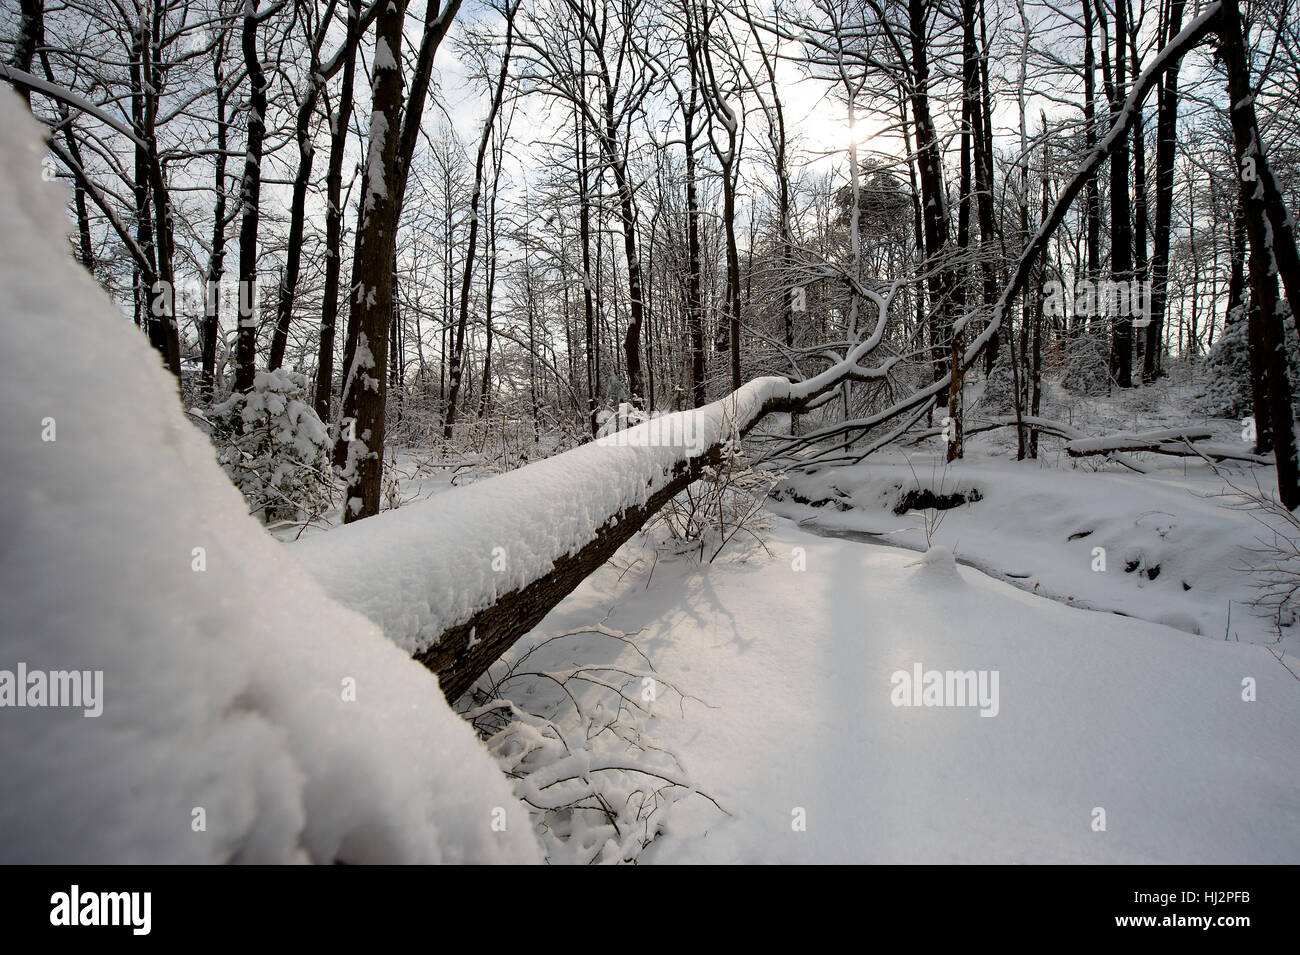 A fresh snow blankets a forest and a large fallen tree. Stock Photo